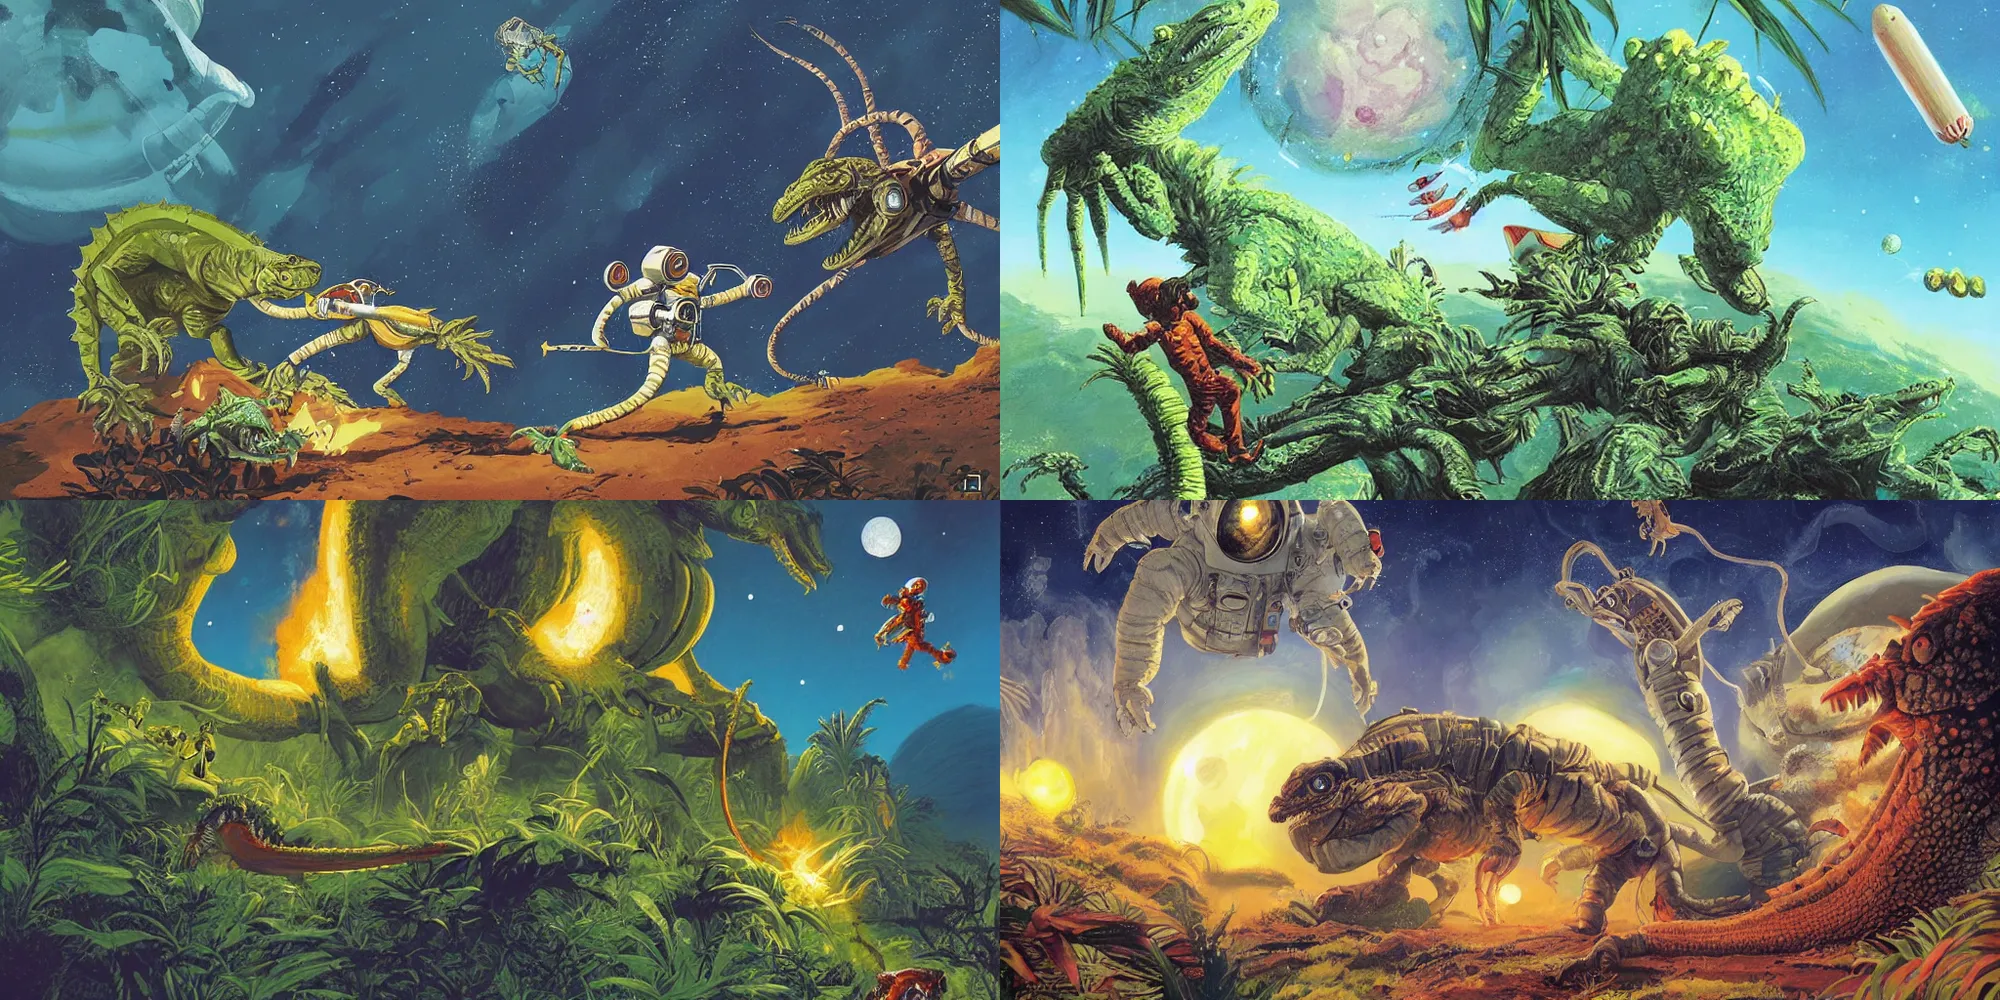 Prompt: a beautiful illustration of an astronaut fighting a lizard monster near a crashed space ship on a strange tropical world by dr. Seuss | sparth:.4 | Tim white:.2 | Rodney Mathews:.1 | Graphic Novel, Visual Novel, Colored Pencil, Comic Book:.2